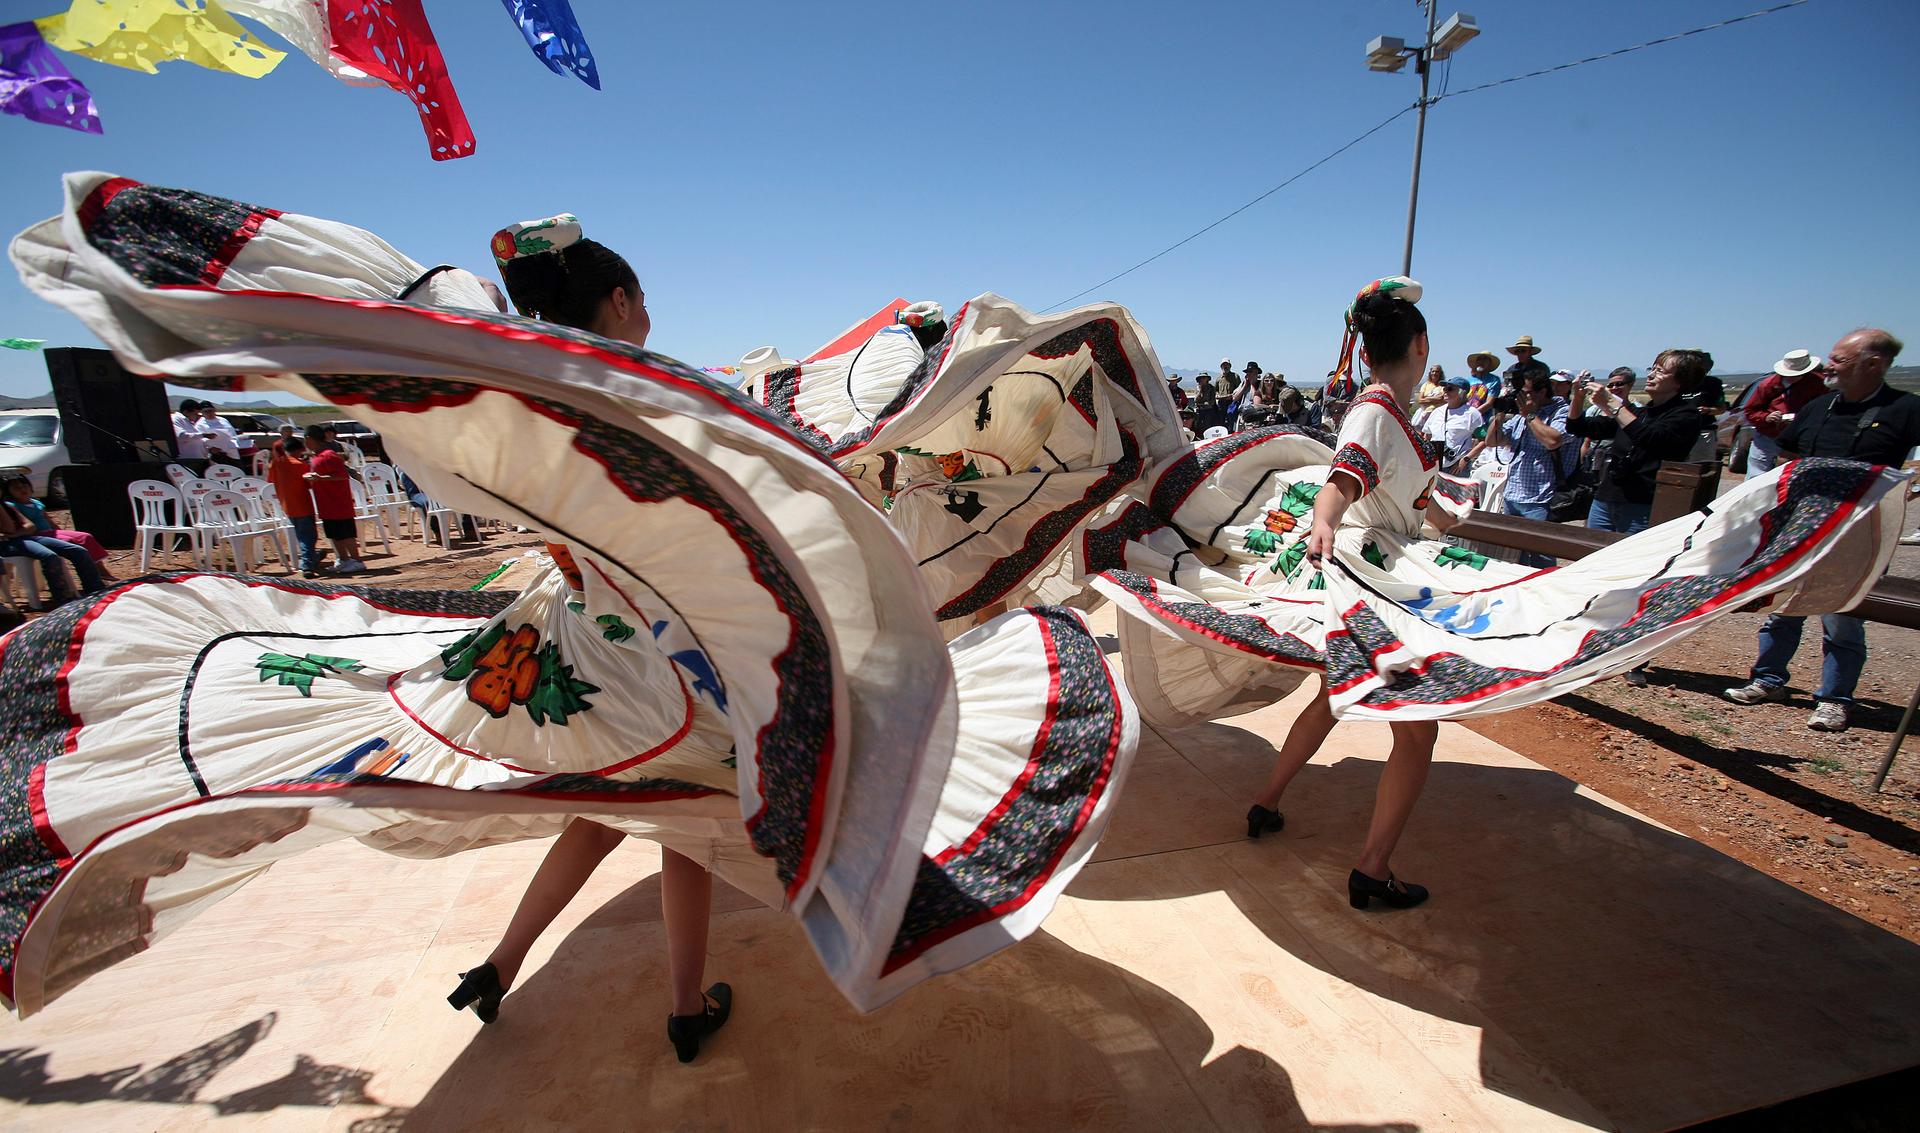 Members of a folklorico dance group from Agua Prieta, Sonora, Mexico, perform